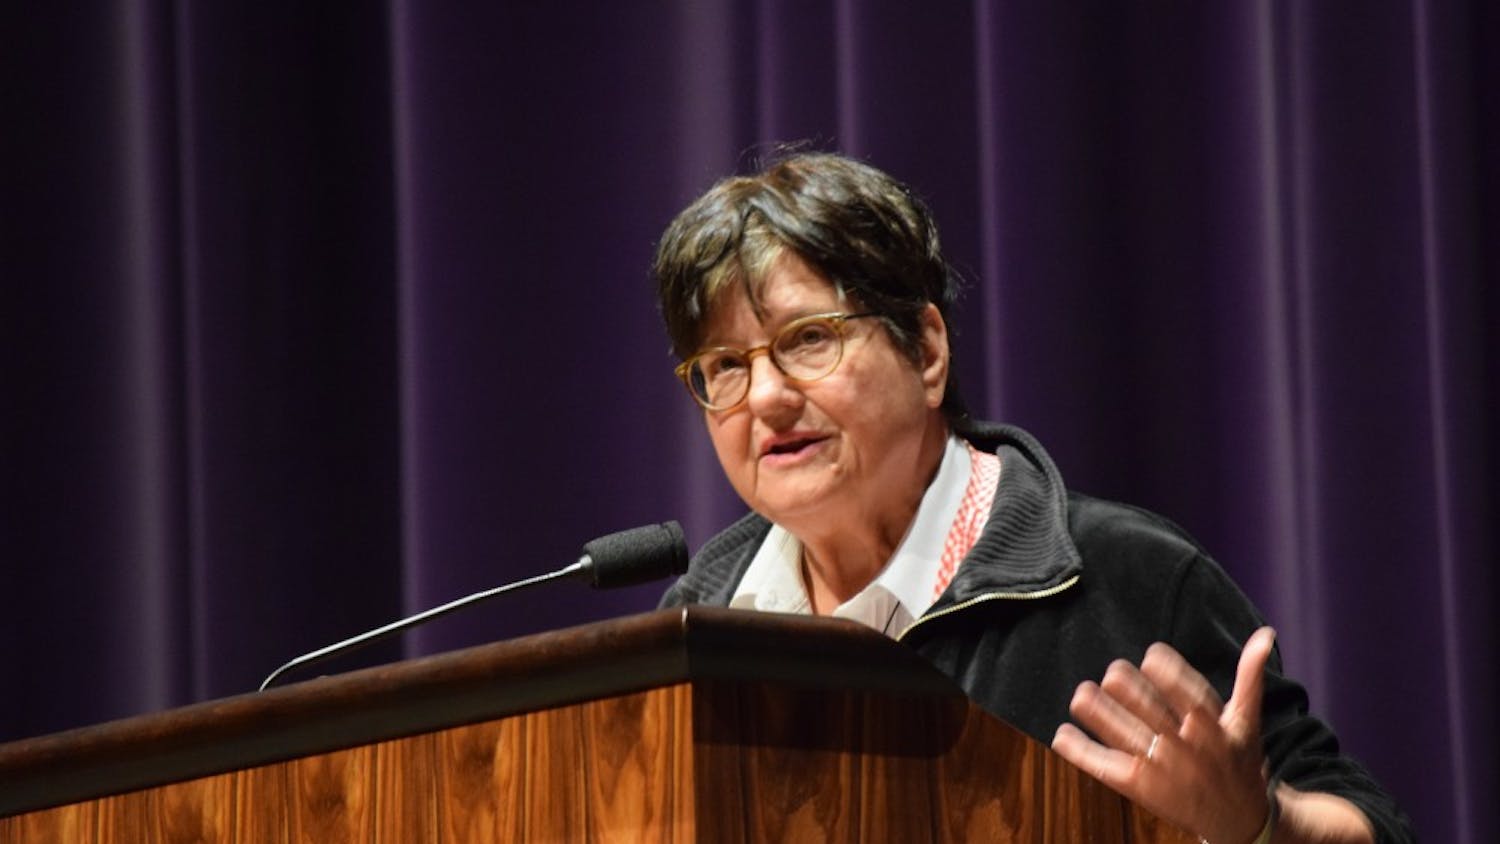 Sister Helen Prejean, the author of “Dead Man Walking: An Eyewitness Account of the Death Penalty,” speaks in a lecture on her book and her opinions on the death penalty in the MAC on Sunday.